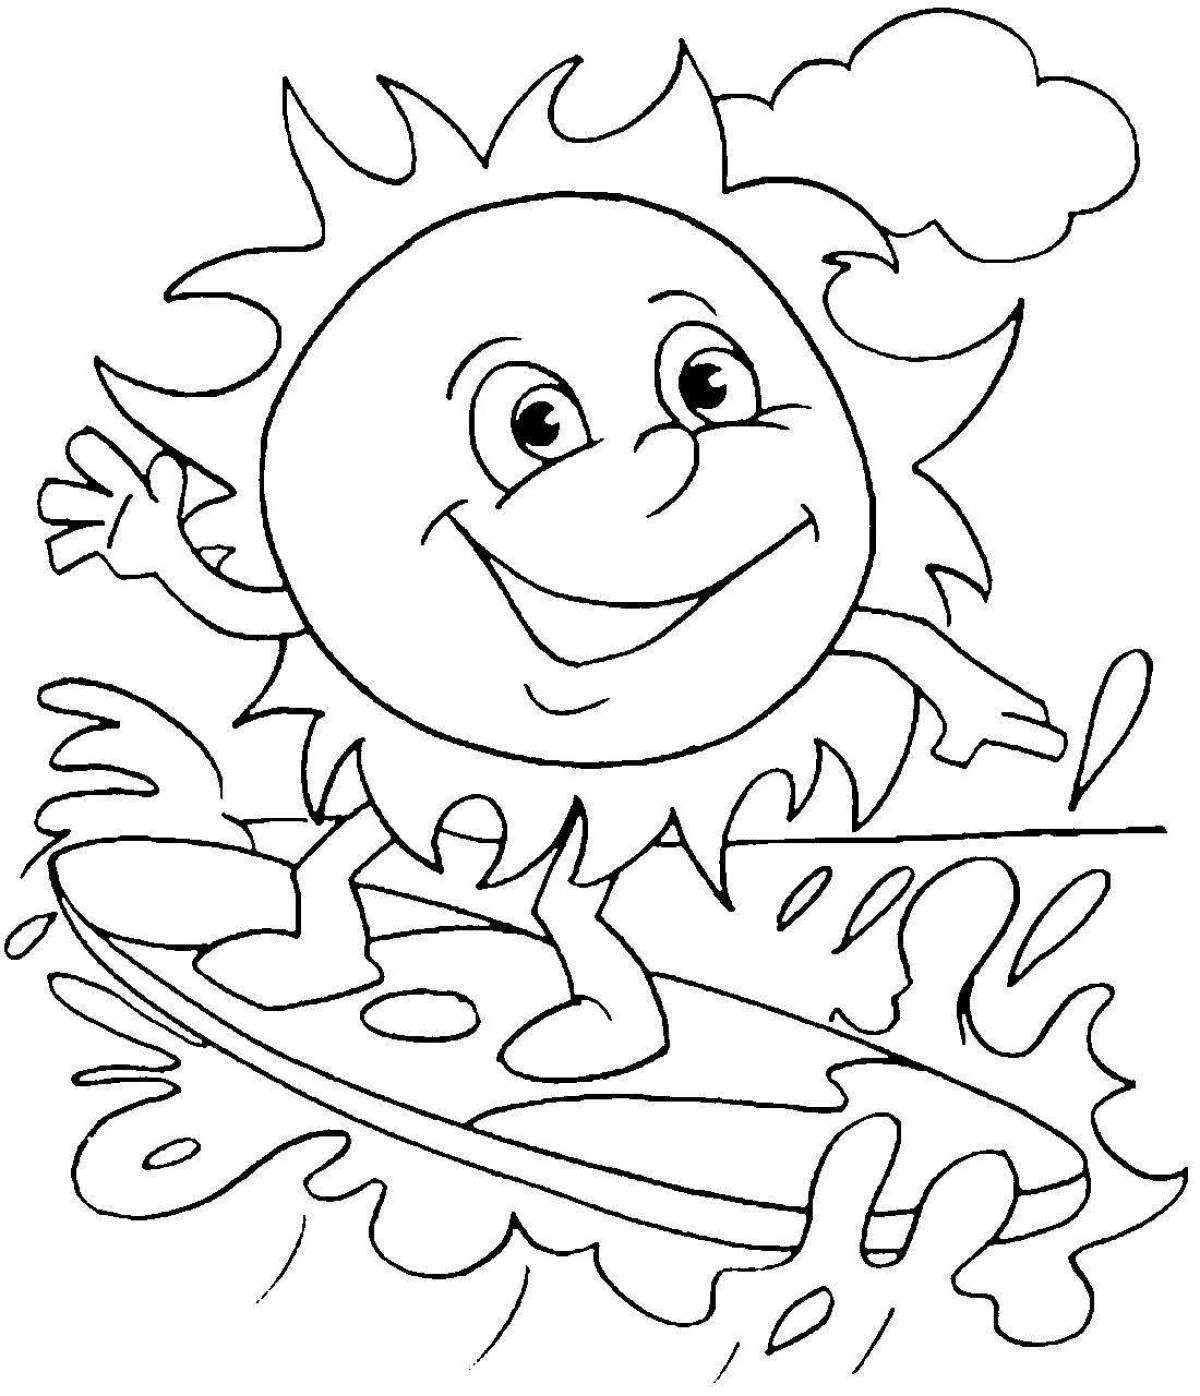 Bright coloring sun for children 4-5 years old